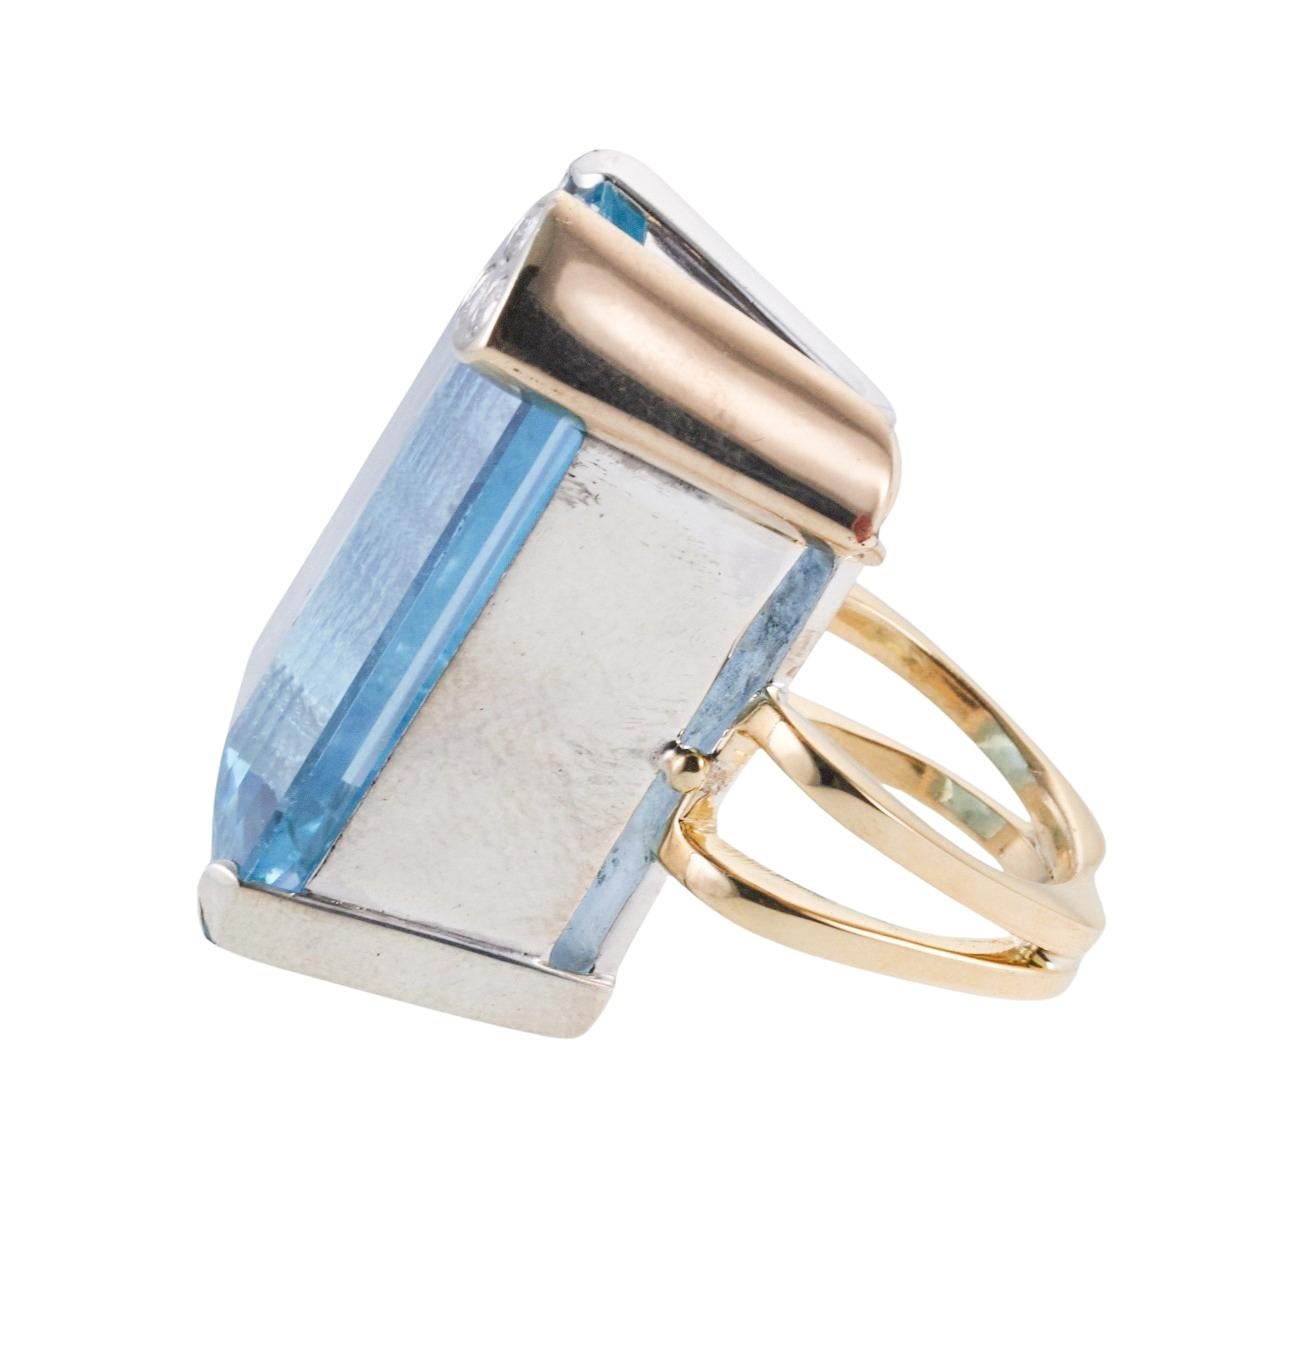 82 Carat Aquamarine Diamond Gold Cocktail Ring In Excellent Condition For Sale In New York, NY